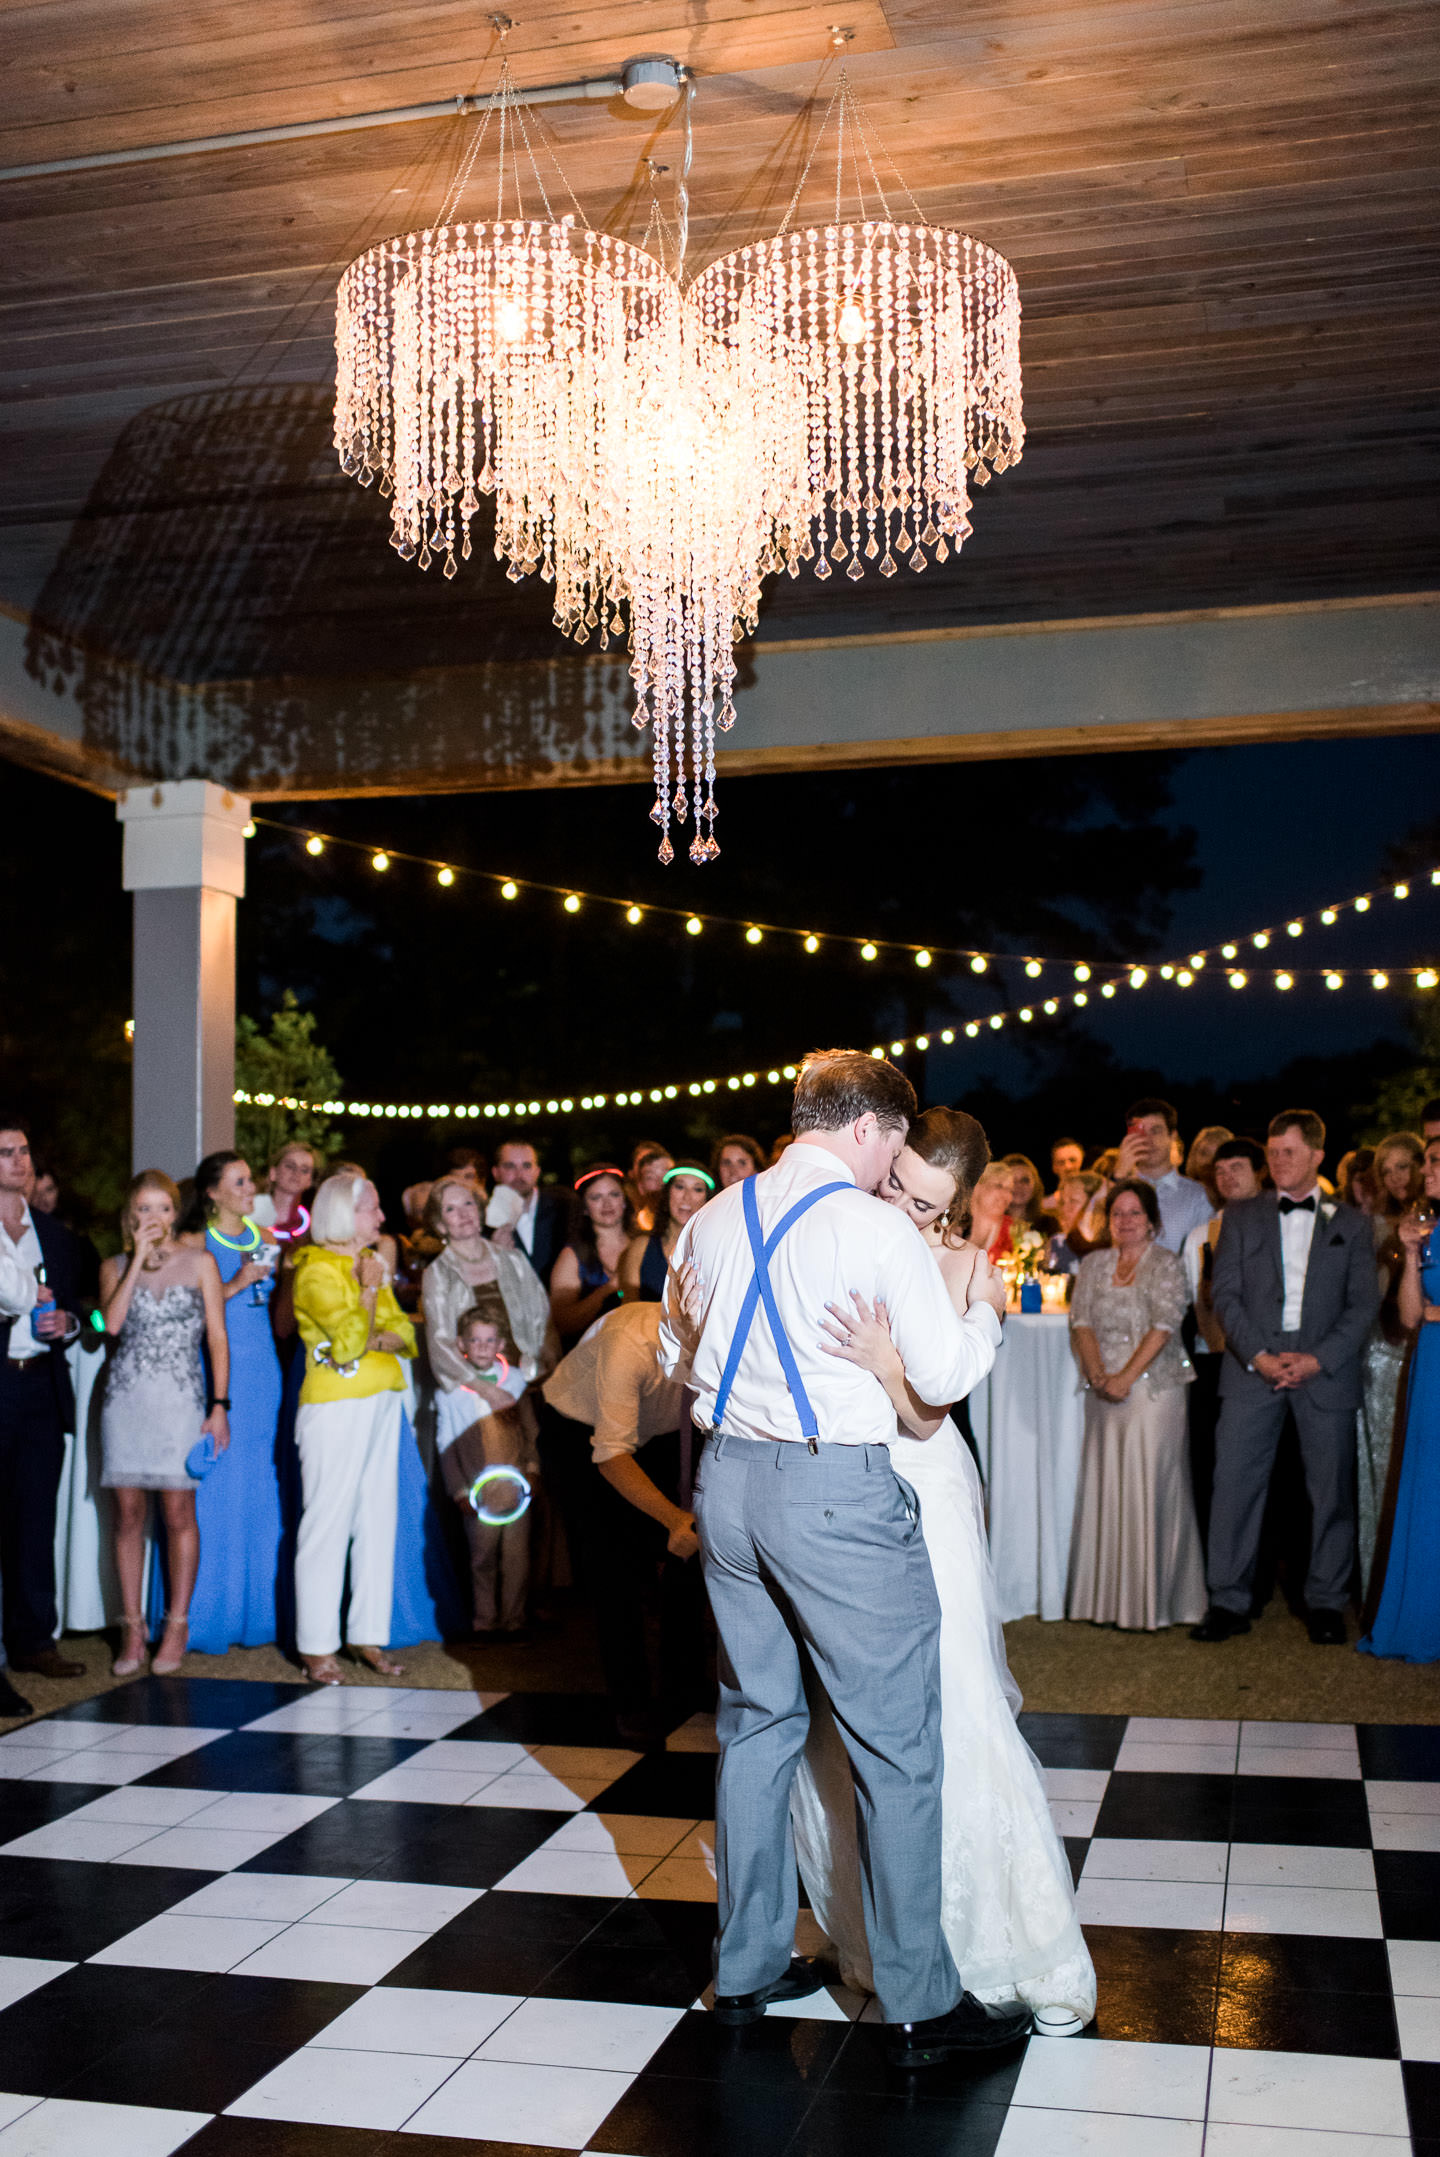 Mississippi bride and groom's first dance on black and white dance floor under chandelier during their southern outdoor wedding reception